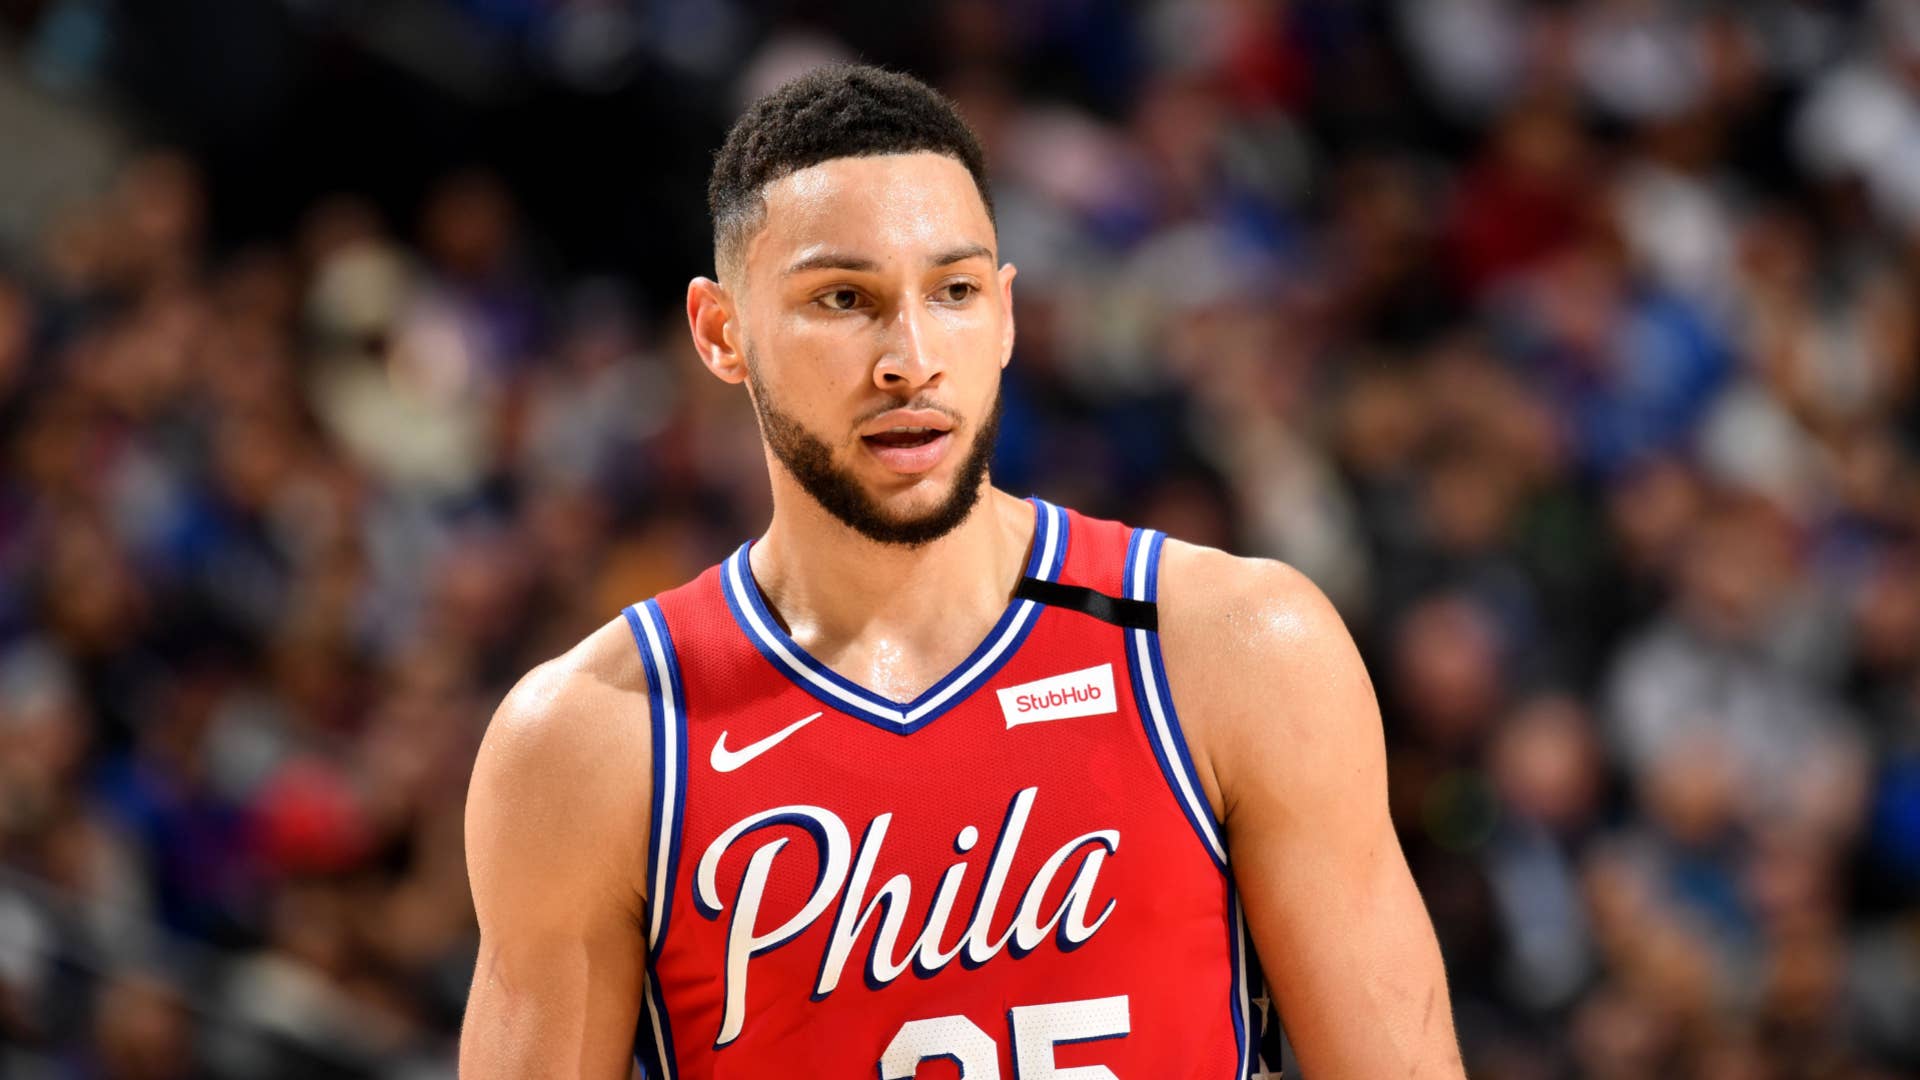 Ben Simmons looks on during a game against the LA Clippers.